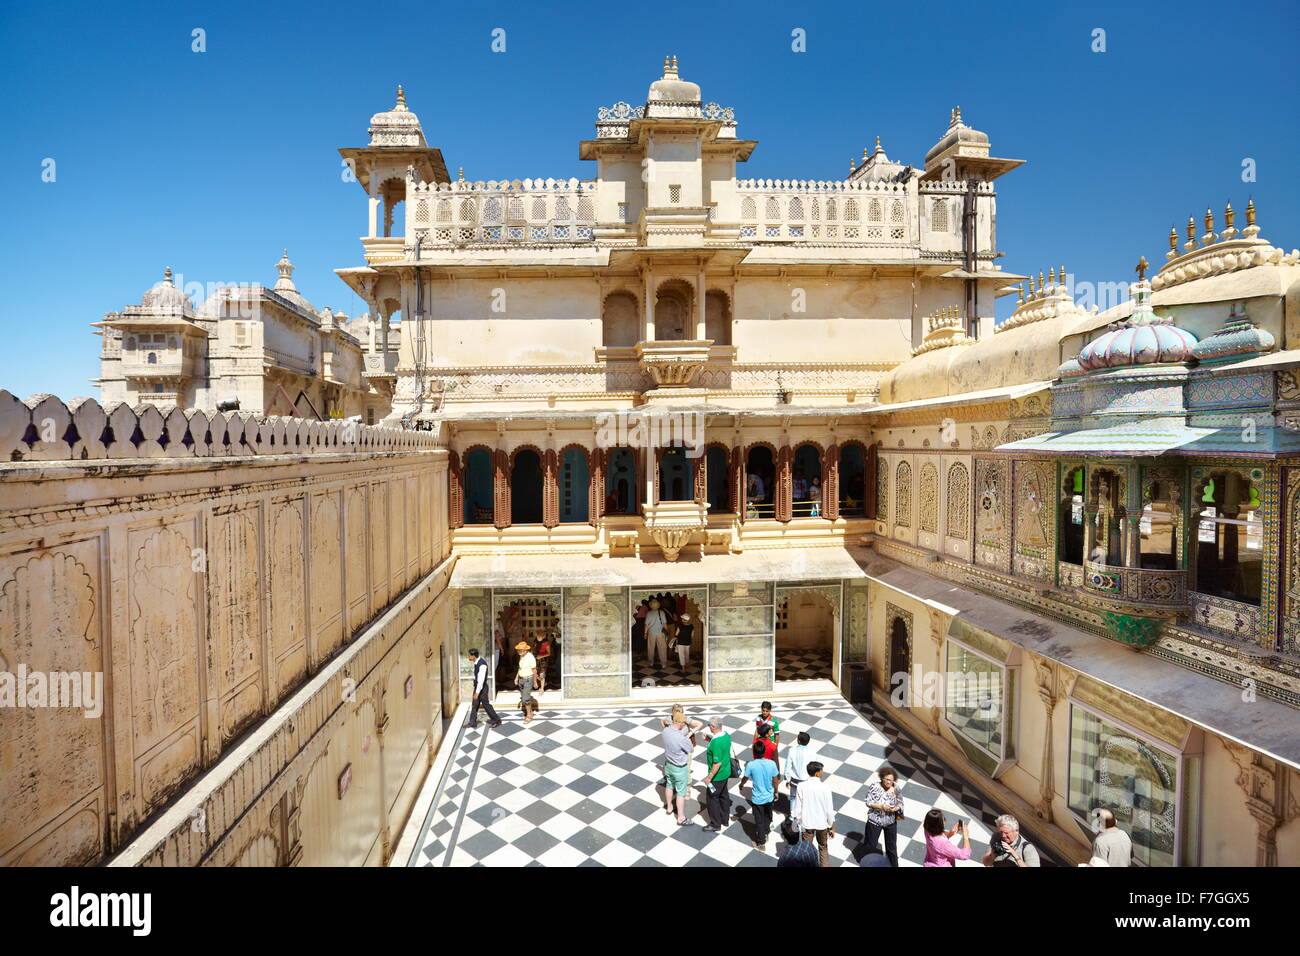 Udaipur - cortile interno in Udaipur City Palace di Udaipur, Rajasthan, India Foto Stock